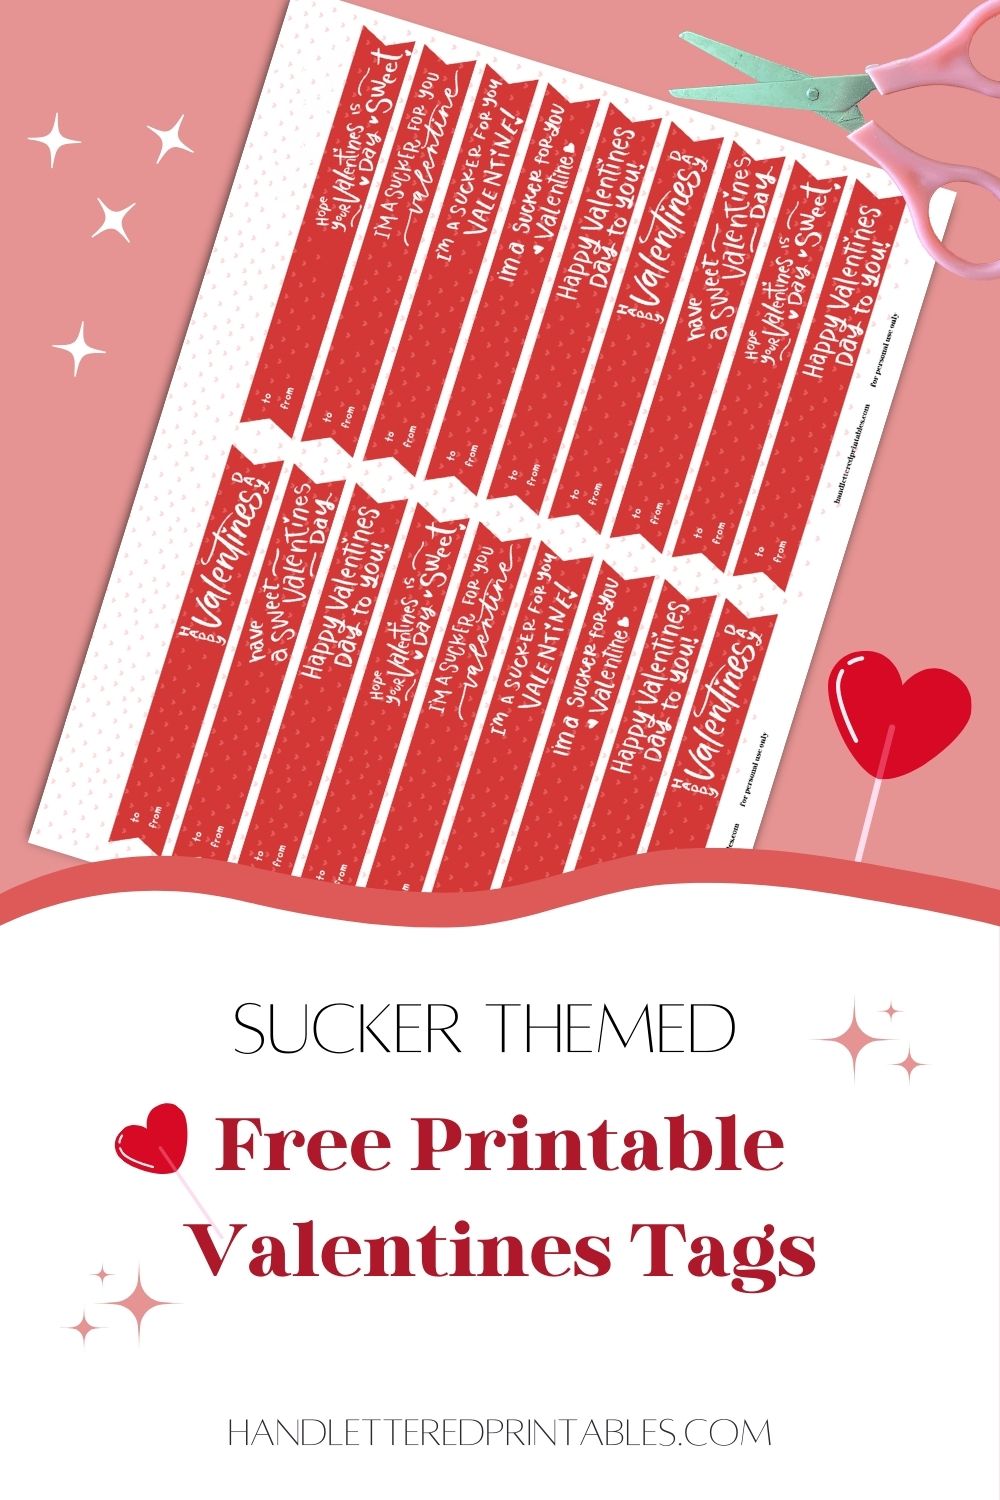 Free printable sucker tags for valentines day, image of printed sheet with scissors